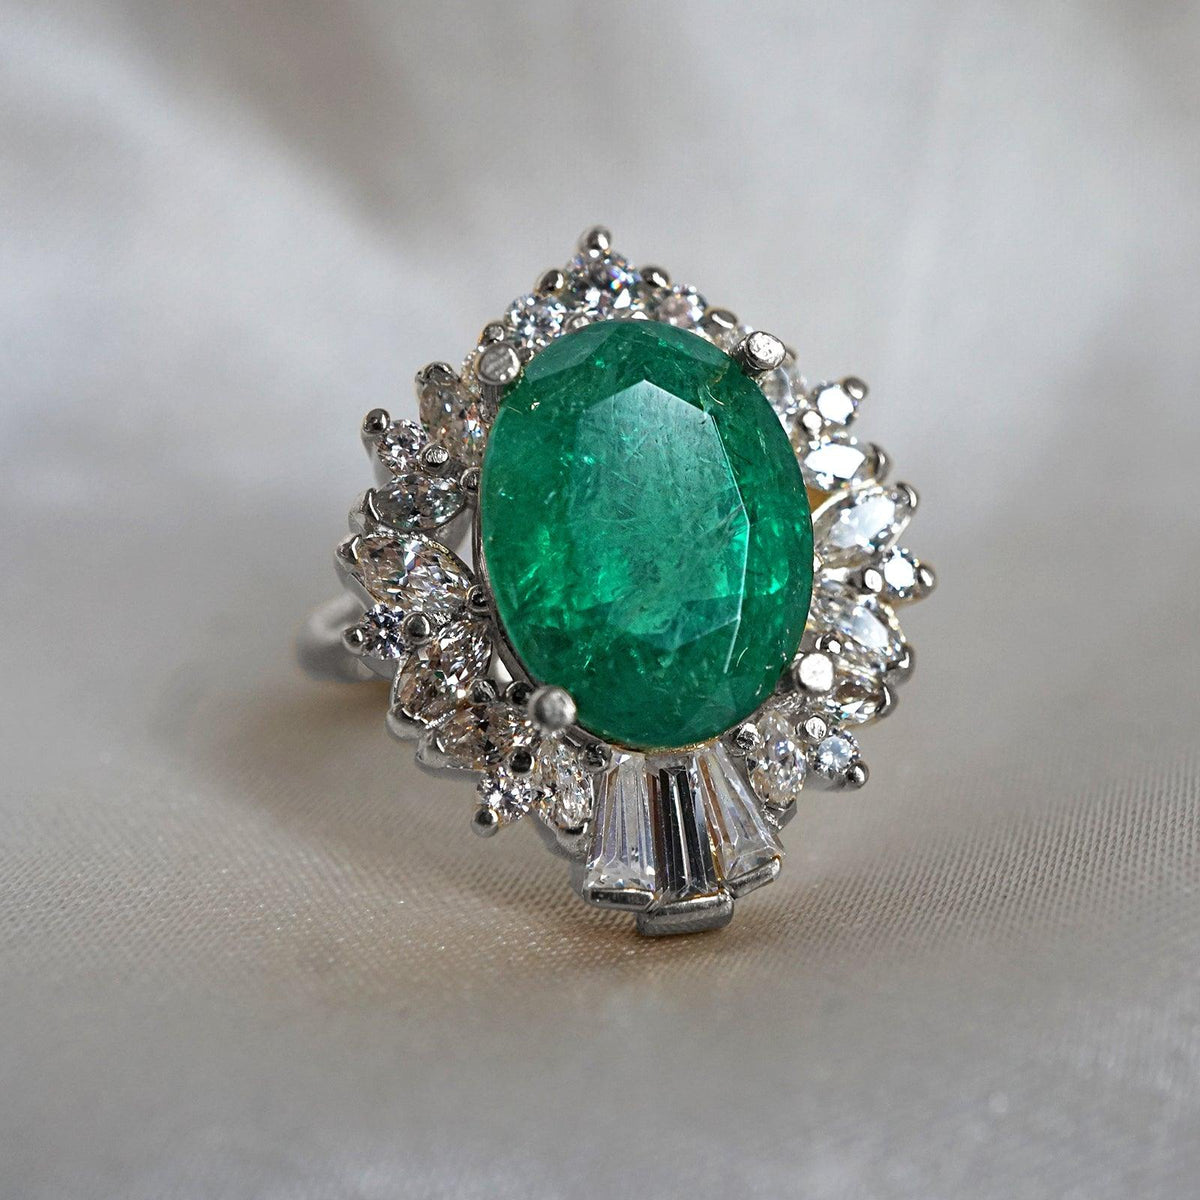 Hall Of Mirrors Oval Emerald Diamond Ring in 14K and 18K Gold, 3.9ct - Tippy Taste Jewelry